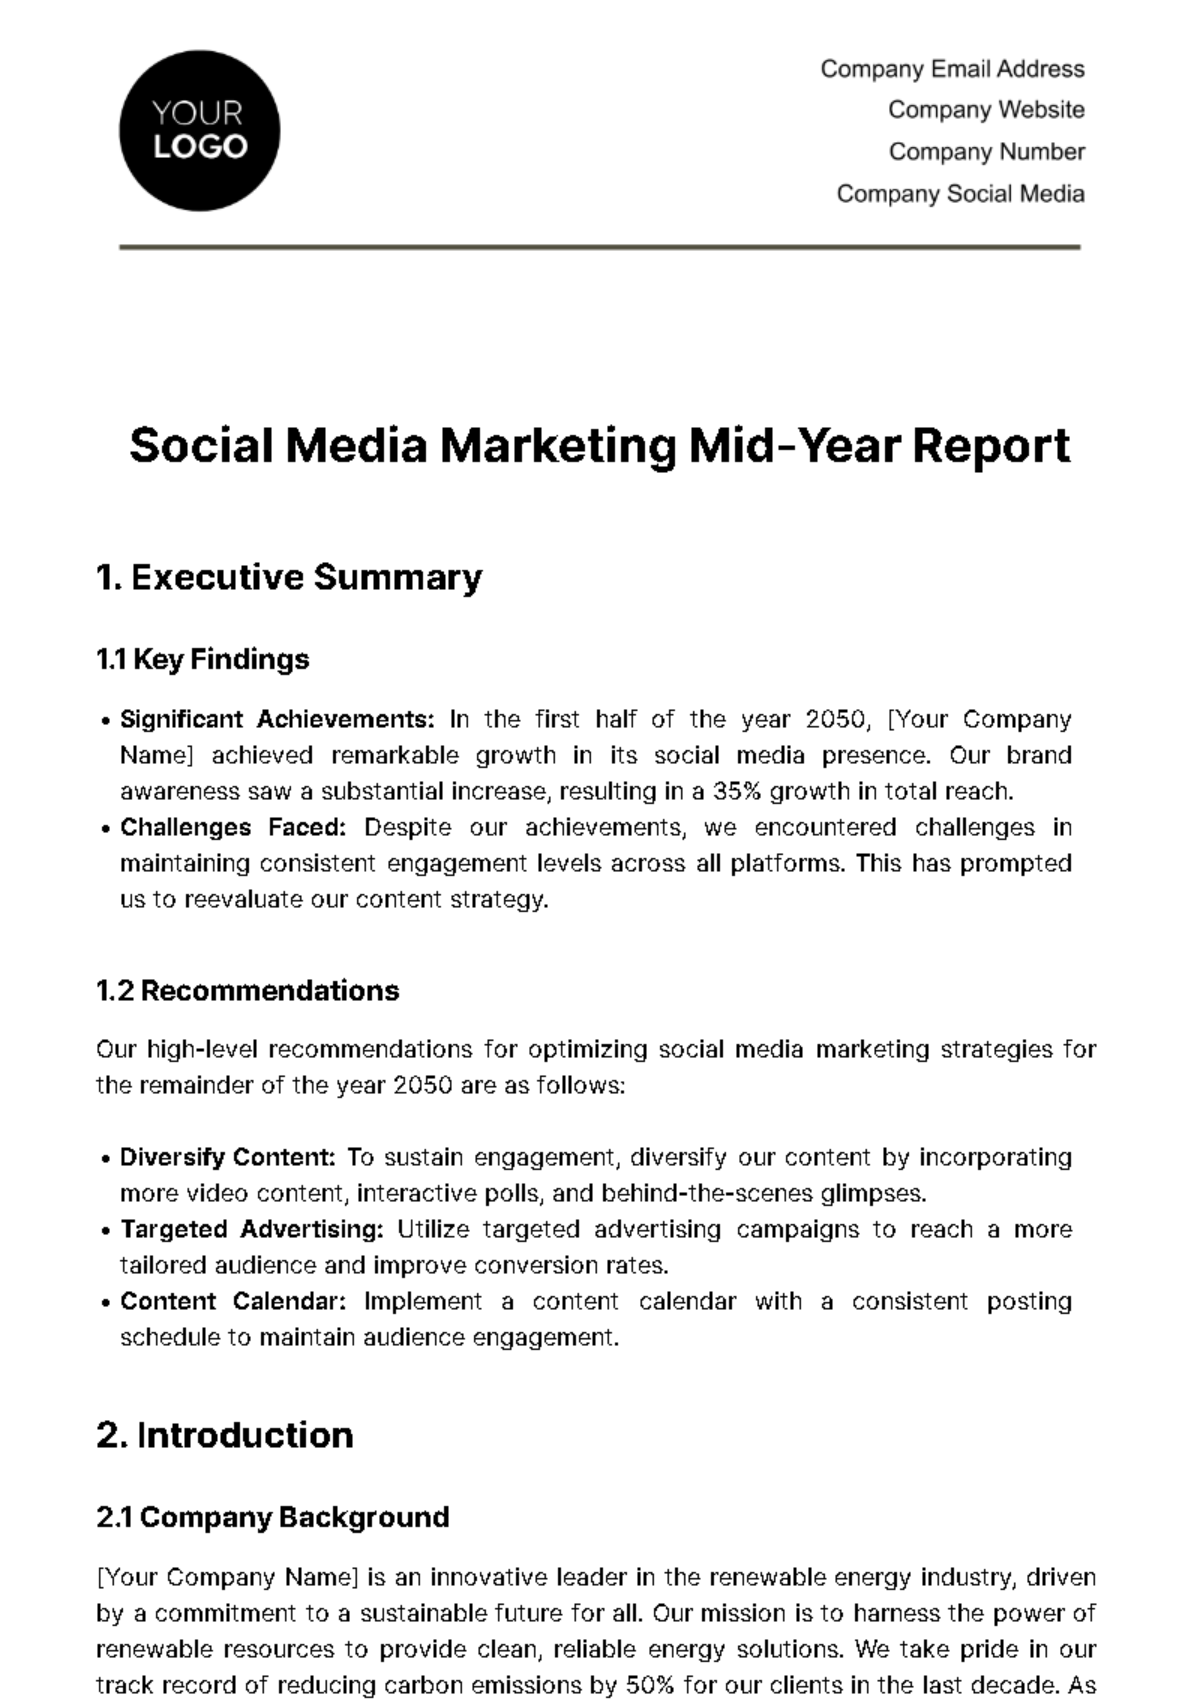 Free Social Media Marketing Mid-Year Report Template